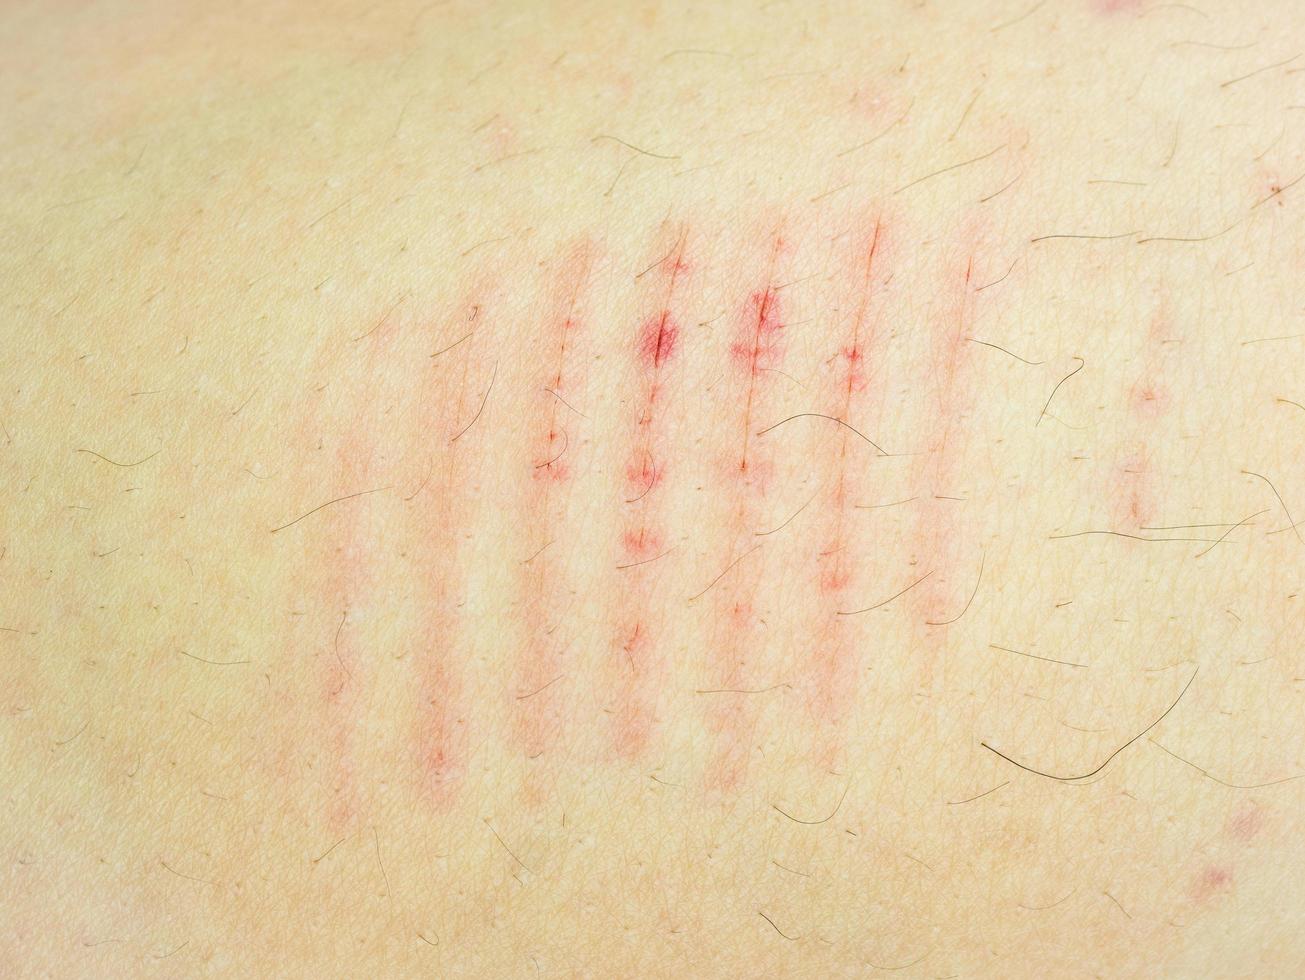 Close-up scar scratch on the human body photo